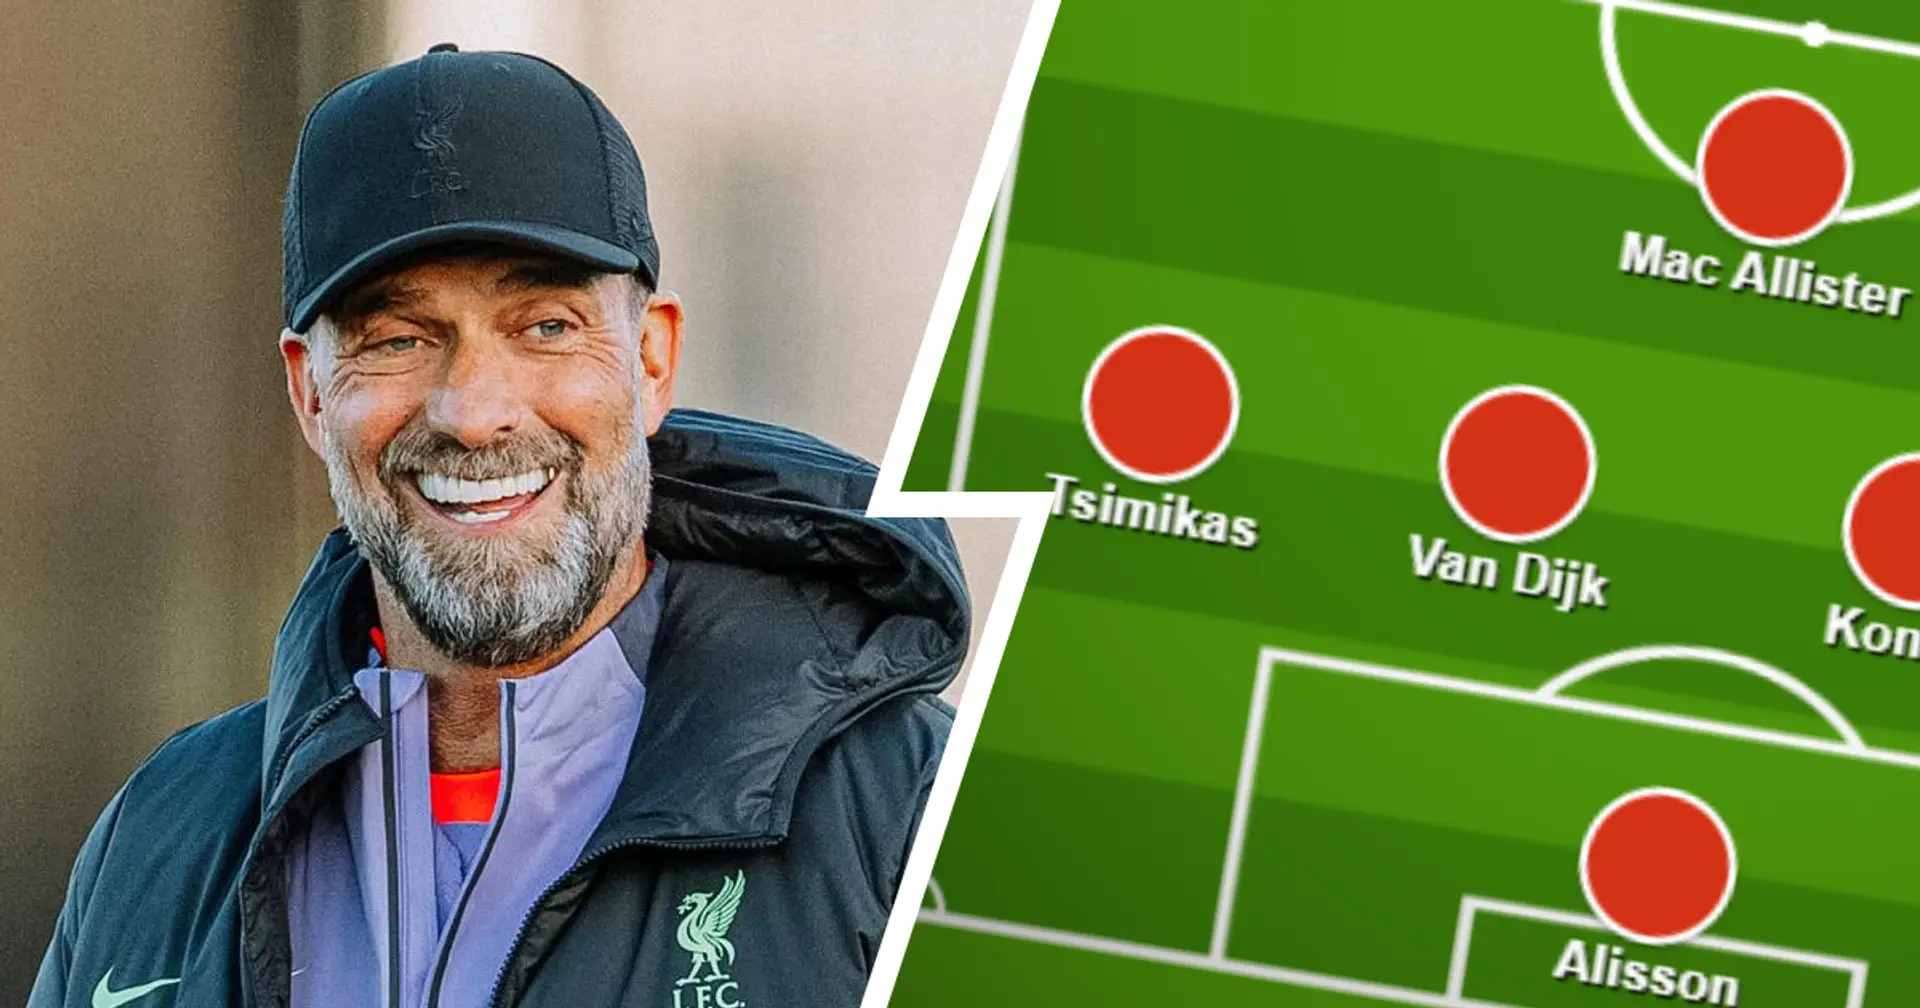 Liverpool's ideal XI for Man City game on November 25 with as many fit players as possible